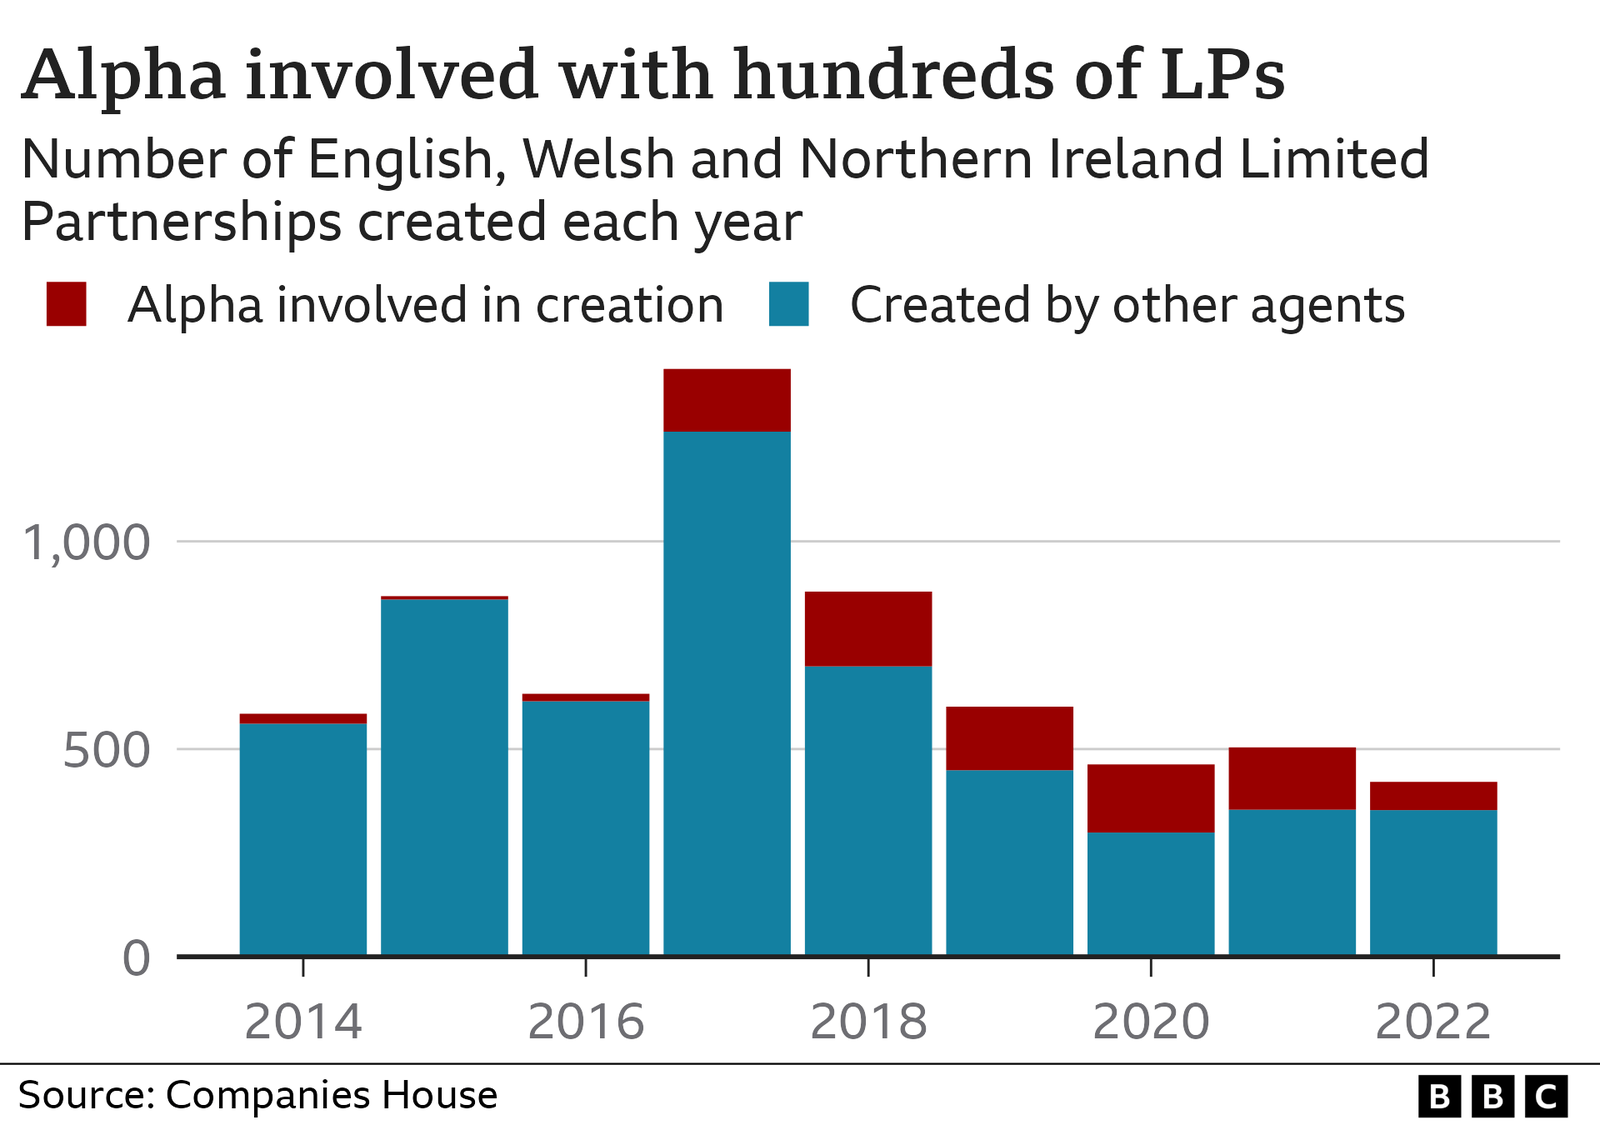 Bar chart showing the number of limited partnerships created in England, Wales and Northern Ireland from 2014 to 2022, showing a surge in 2017, with a significant proportion each year marked as created by Alpha Consulting